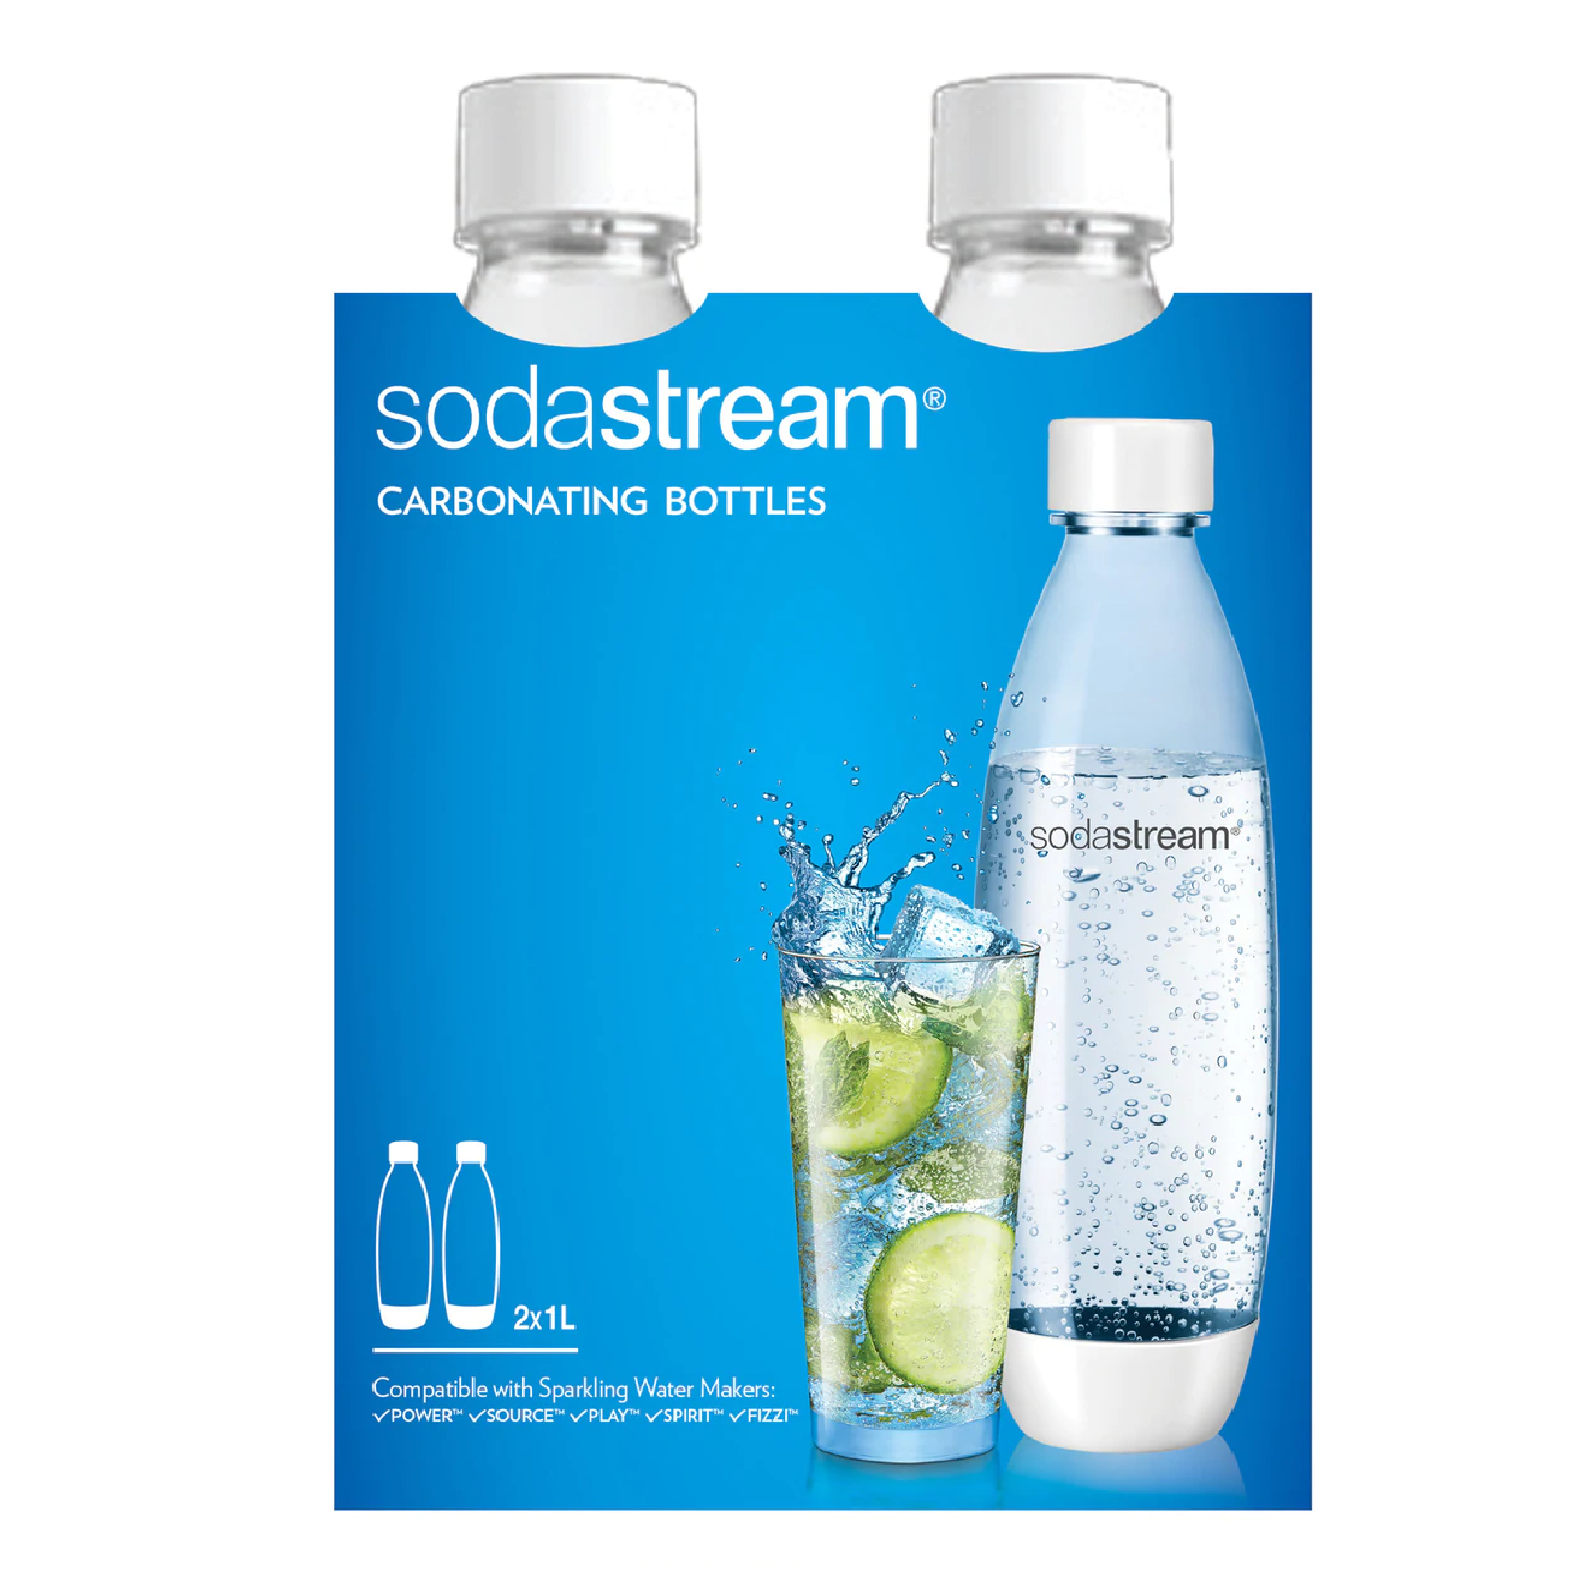 SODASTREAM Carbonating Bottles 1L TWIN PACK Fuse White